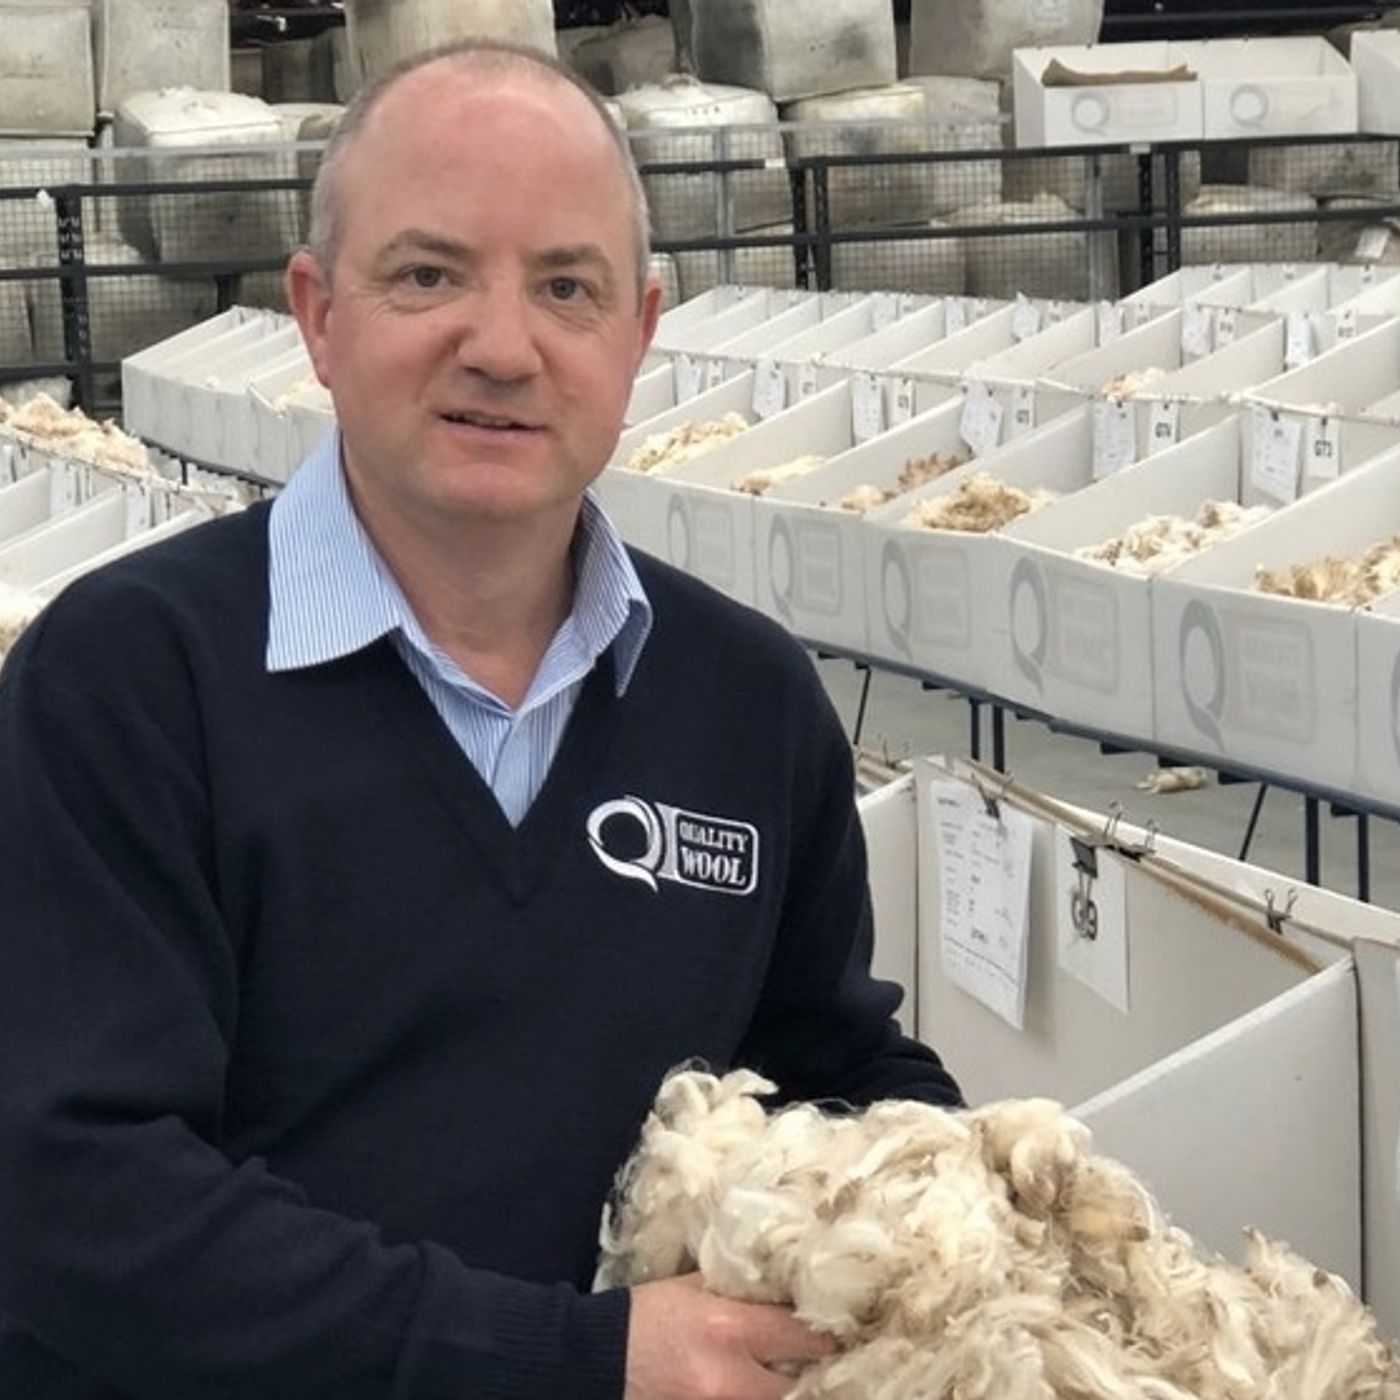 Andrew Partridge from Michell Wool phones in for the Country Viewpoint Market Day edition after a positive week on the market front